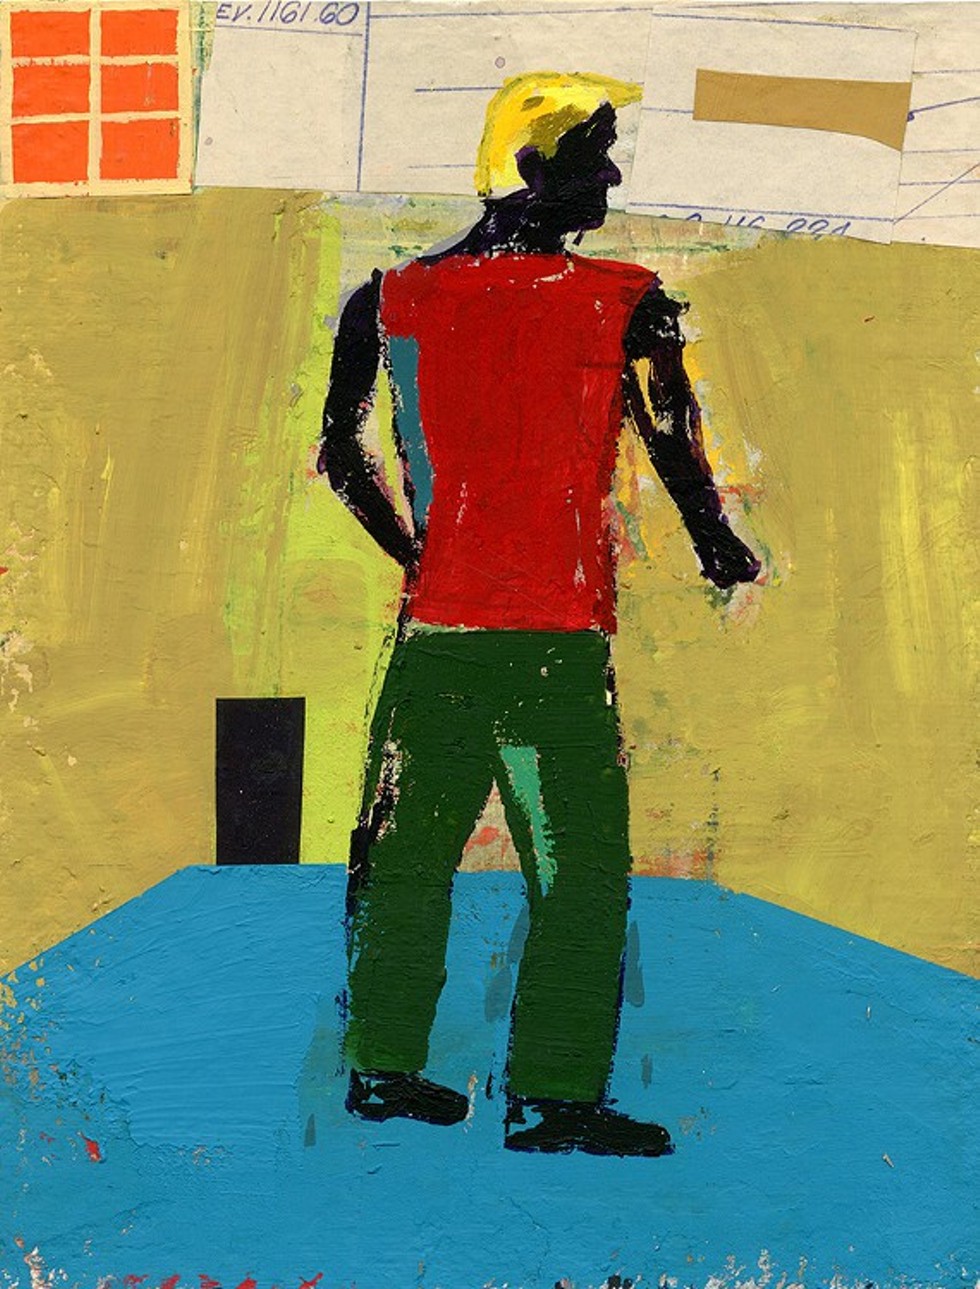 "Standing," 2014, gouache & collage elements, 9 x 6.8 inches